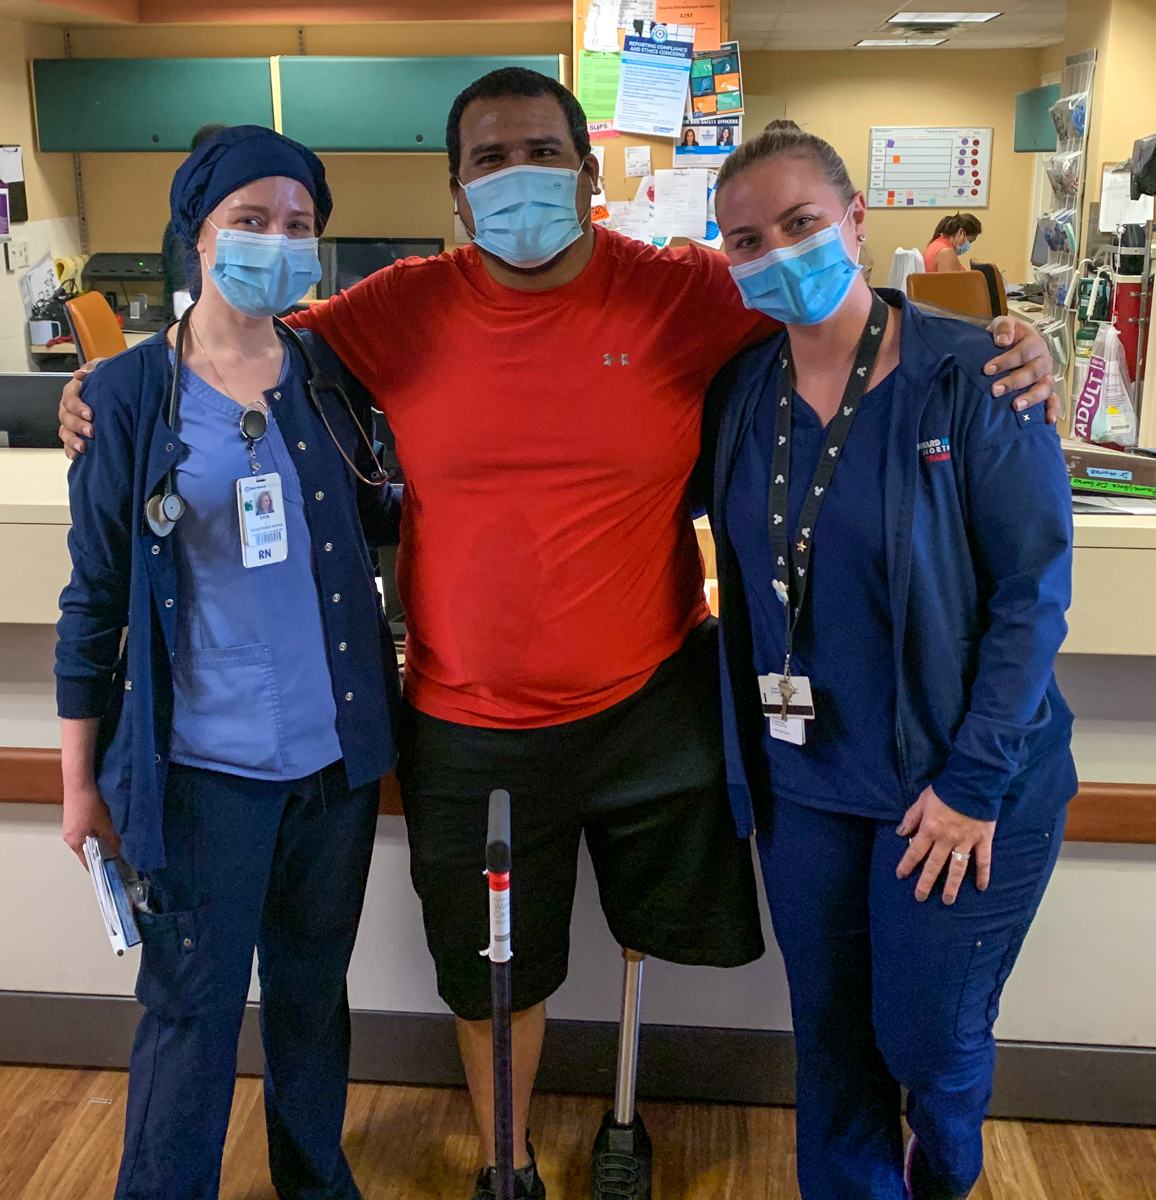 Walter Cappillo celebrates limb loss awareness after life changing accident in Fort Lauderdale by remembering the hospital staff who saved his life